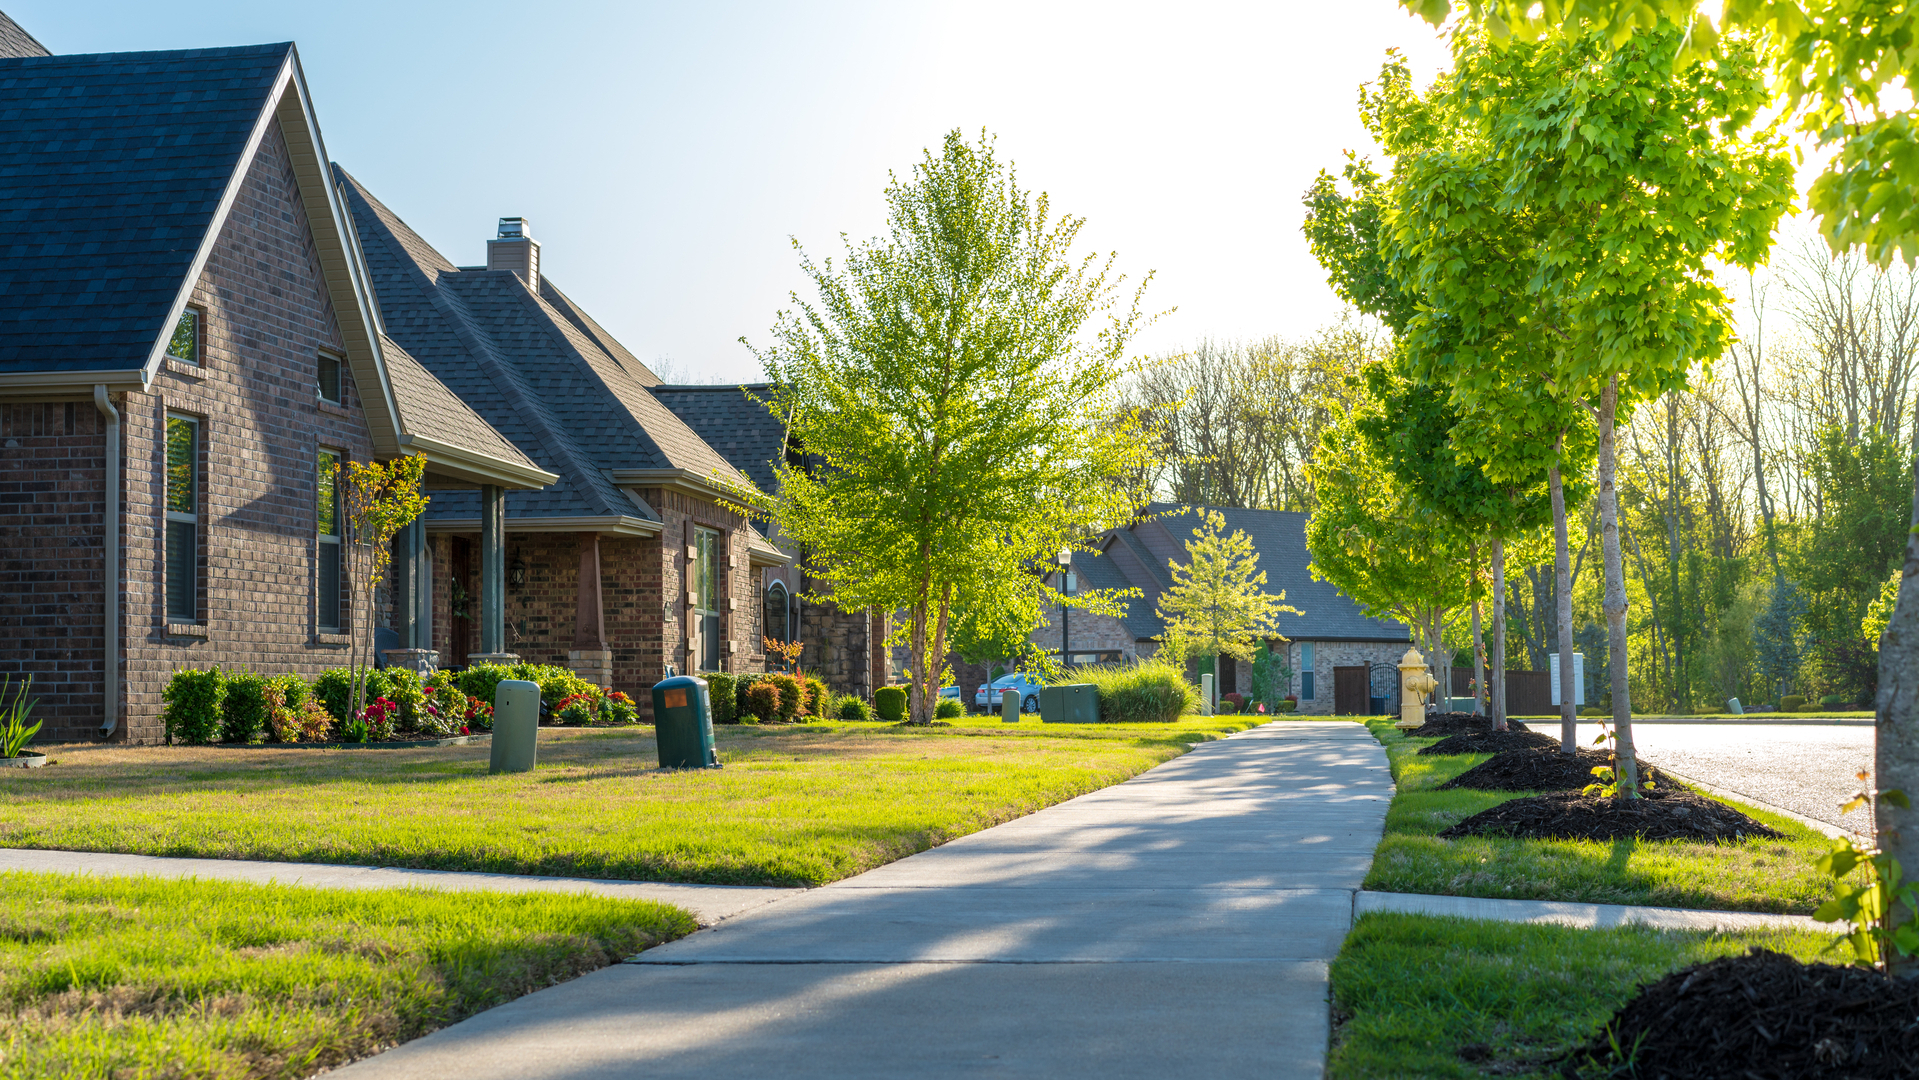 A vibrant neighborhood with regular lawncare in Clayton, PA.